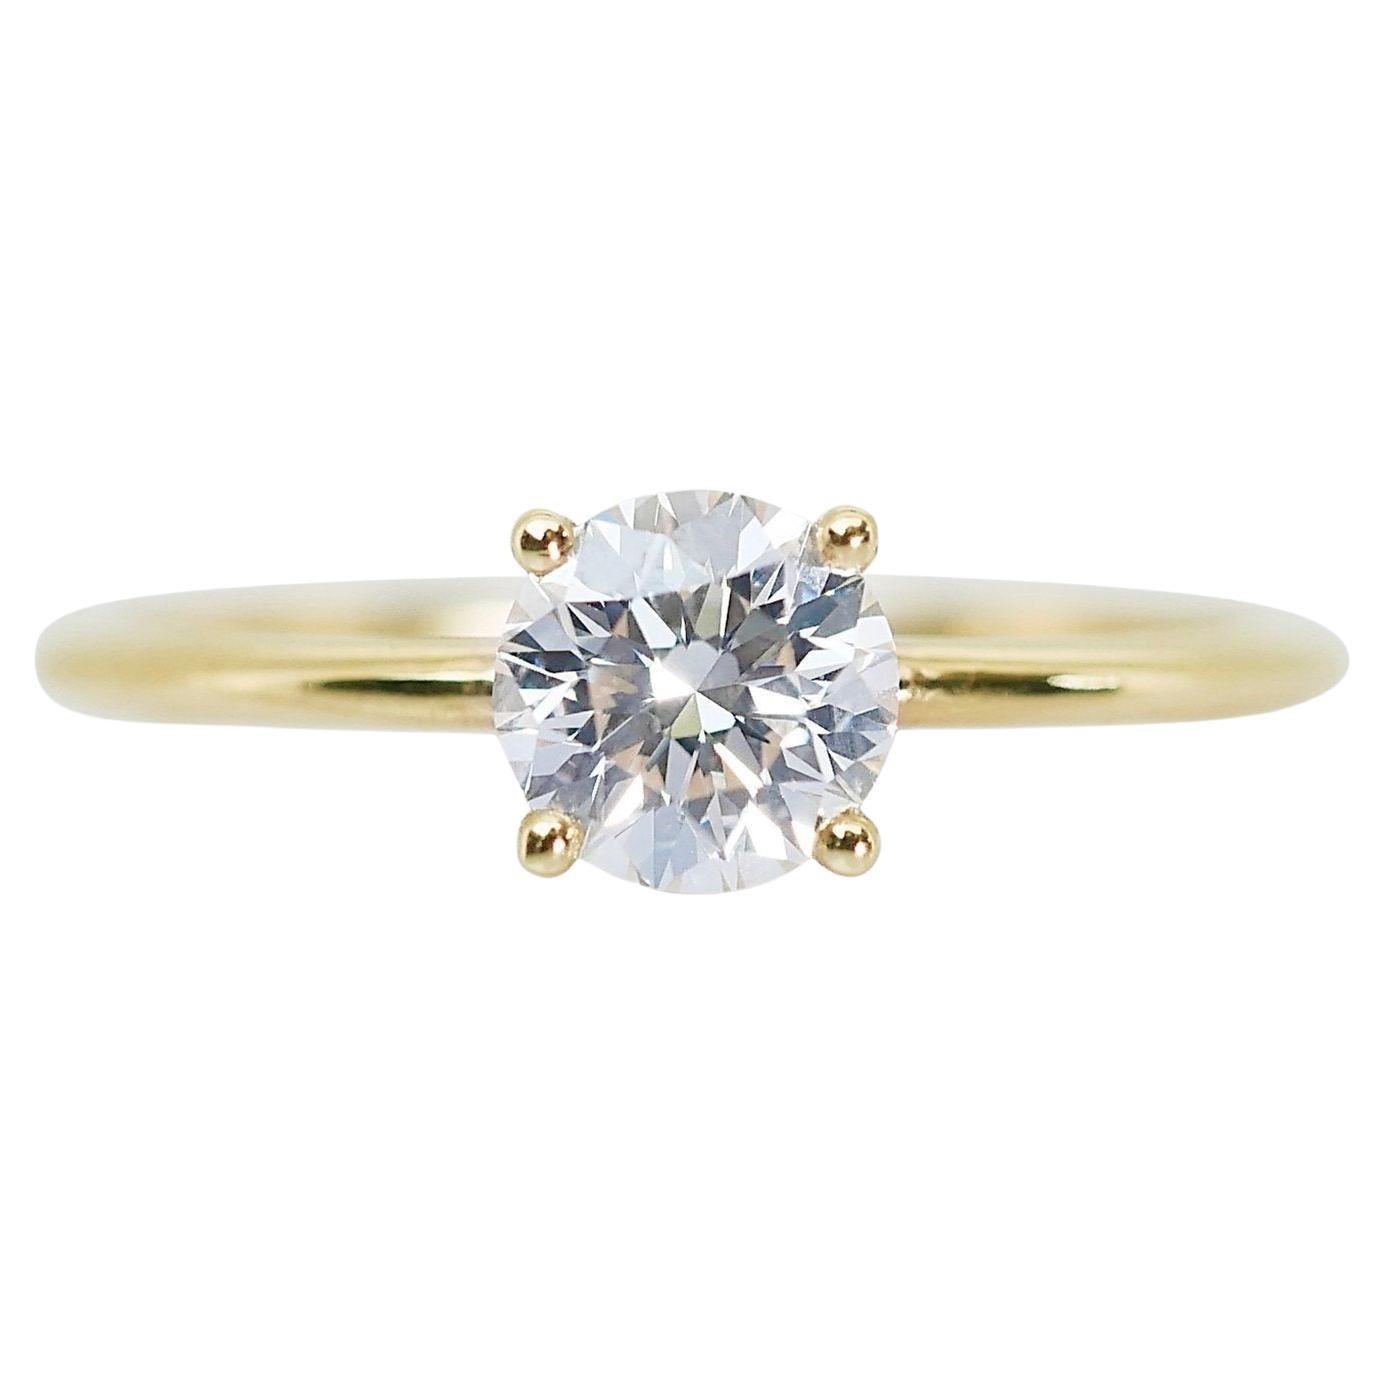 Radiant 1.02ct Round Solitaire Diamond Ring in 18k Yellow Gold - GIA Certified